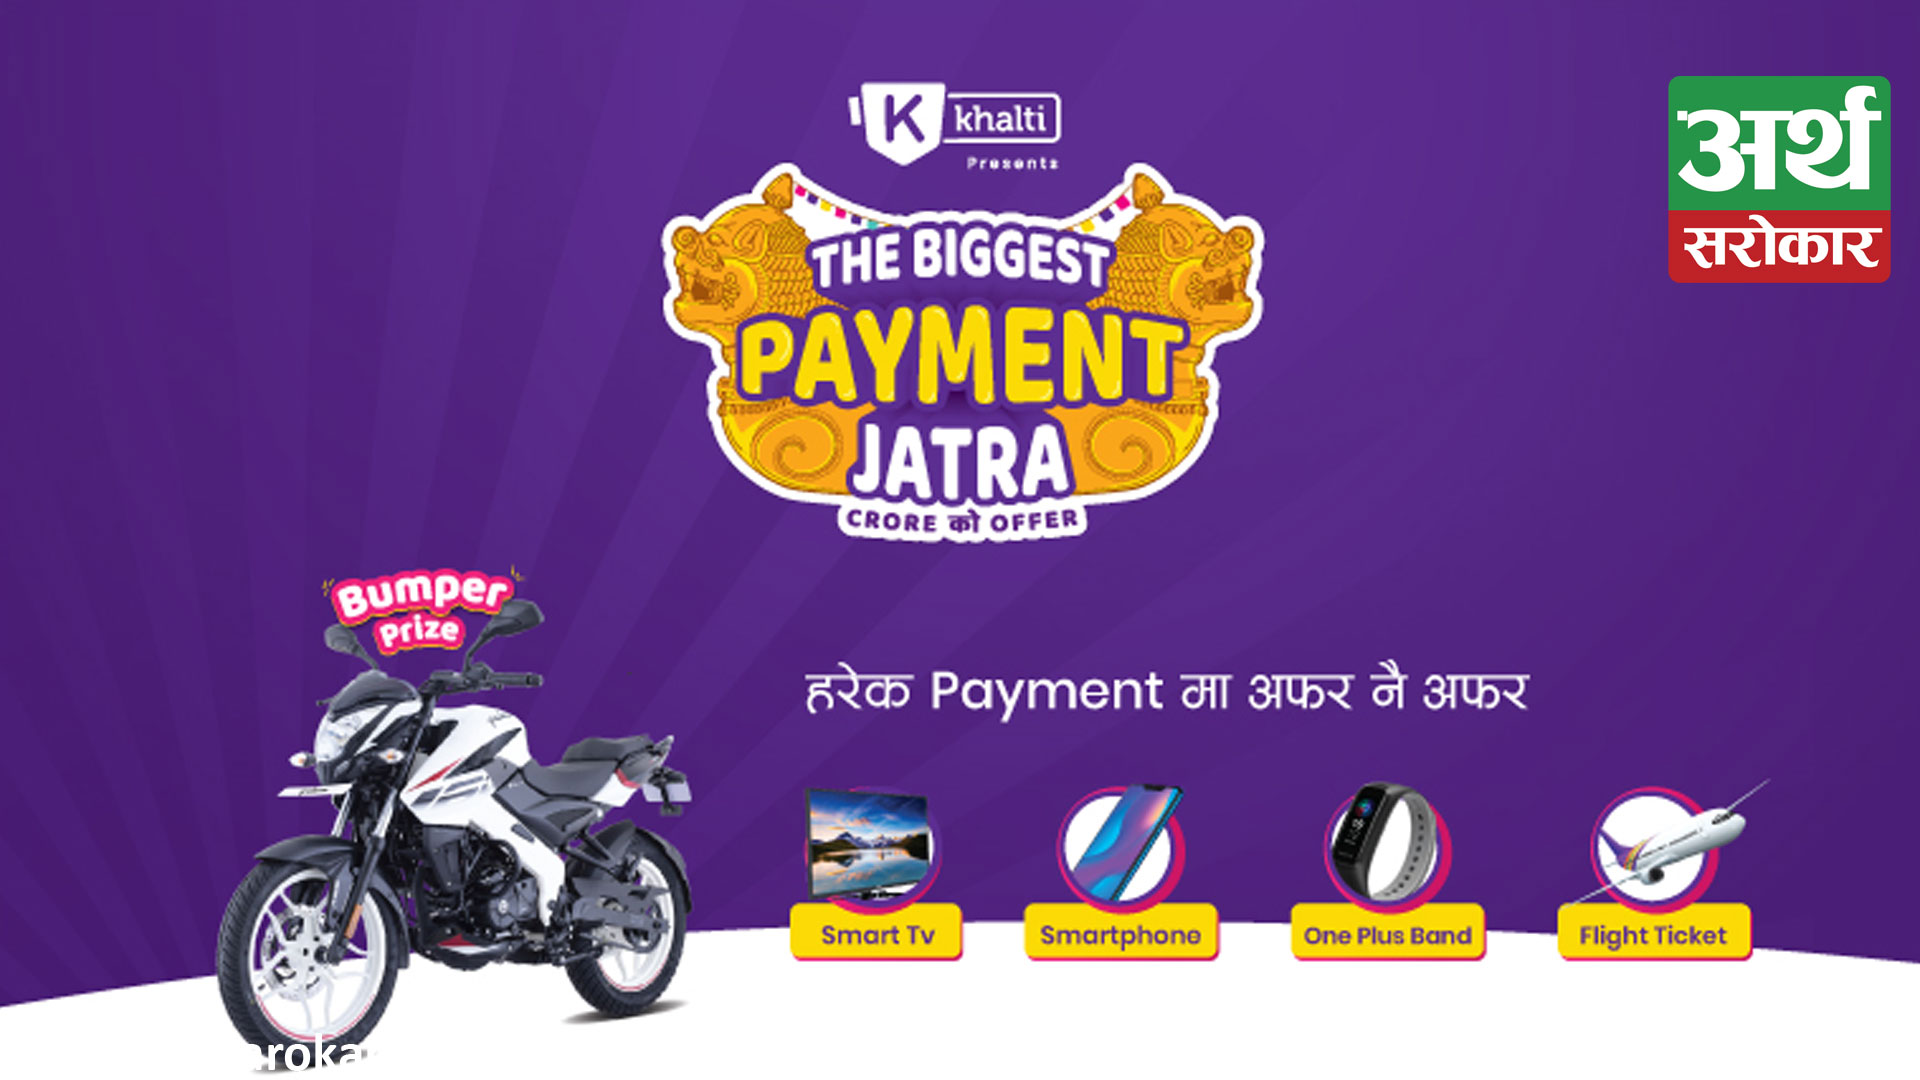 Khalti launches The Biggest Payment Jatra for the year with extra giveaways and offers worth more than Crore